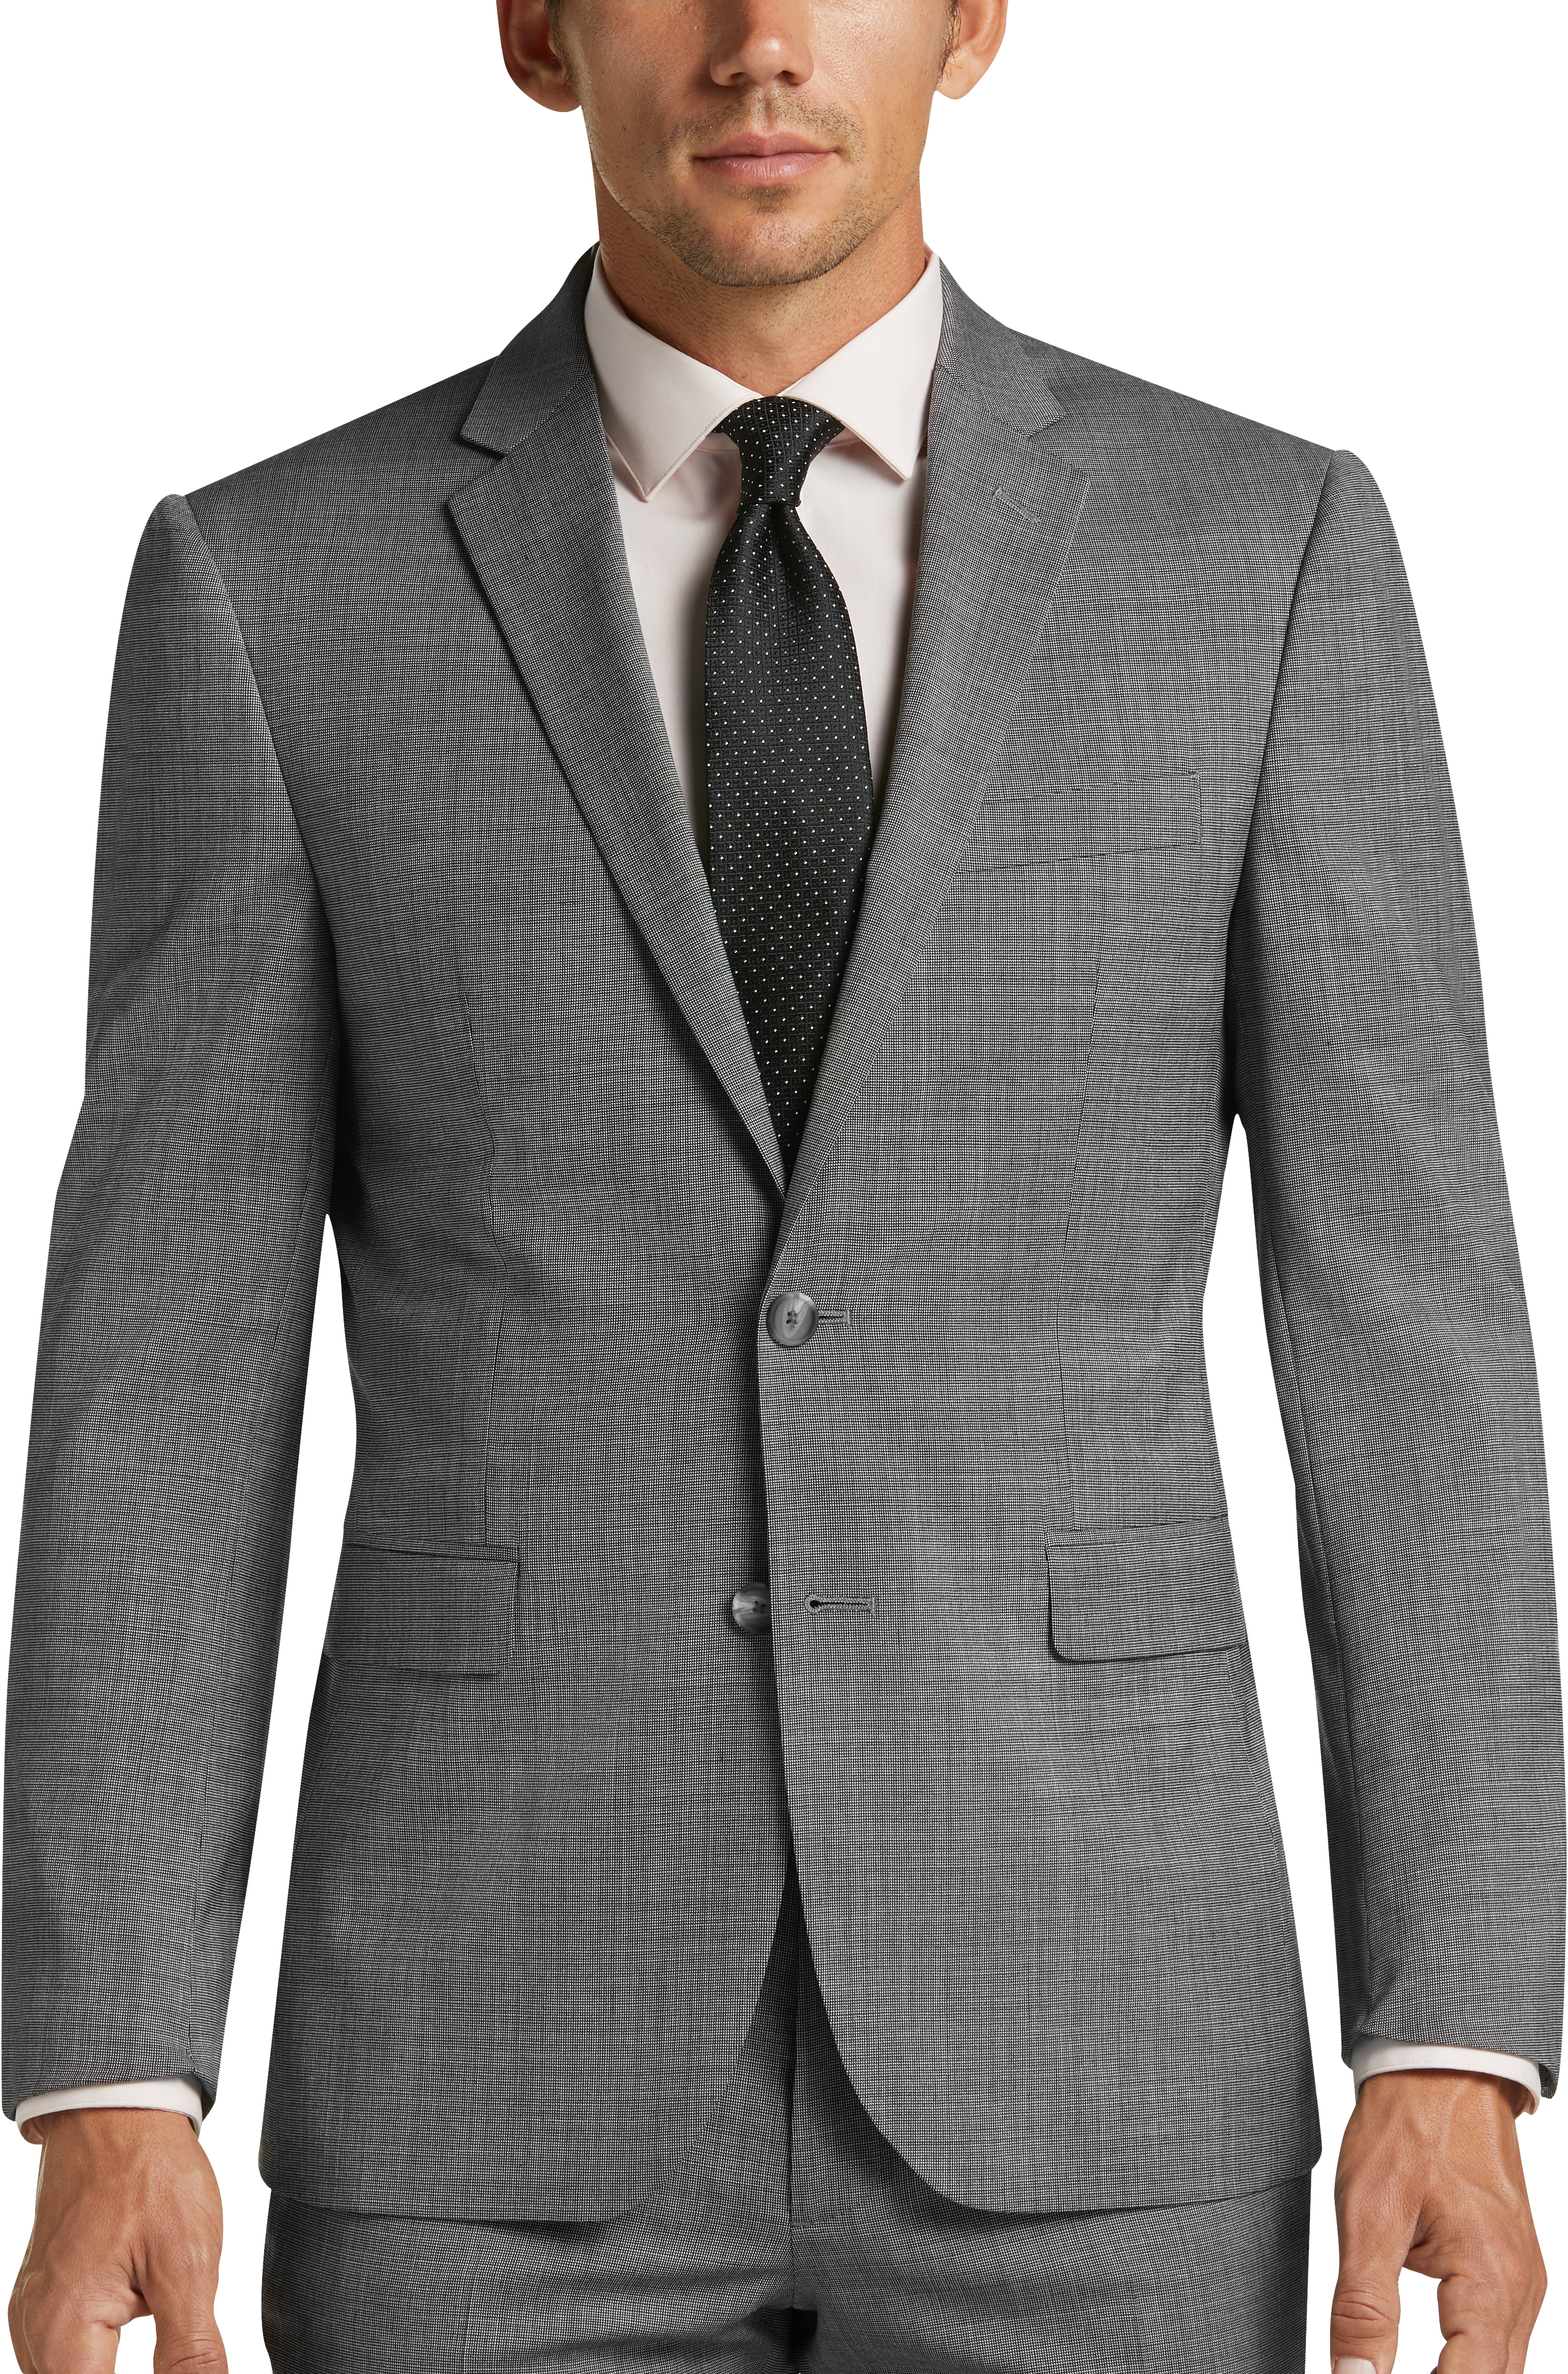 Awearness Kenneth Cole AWEAR-TECH Gray Extreme Slim Fit Suit - Men's ...